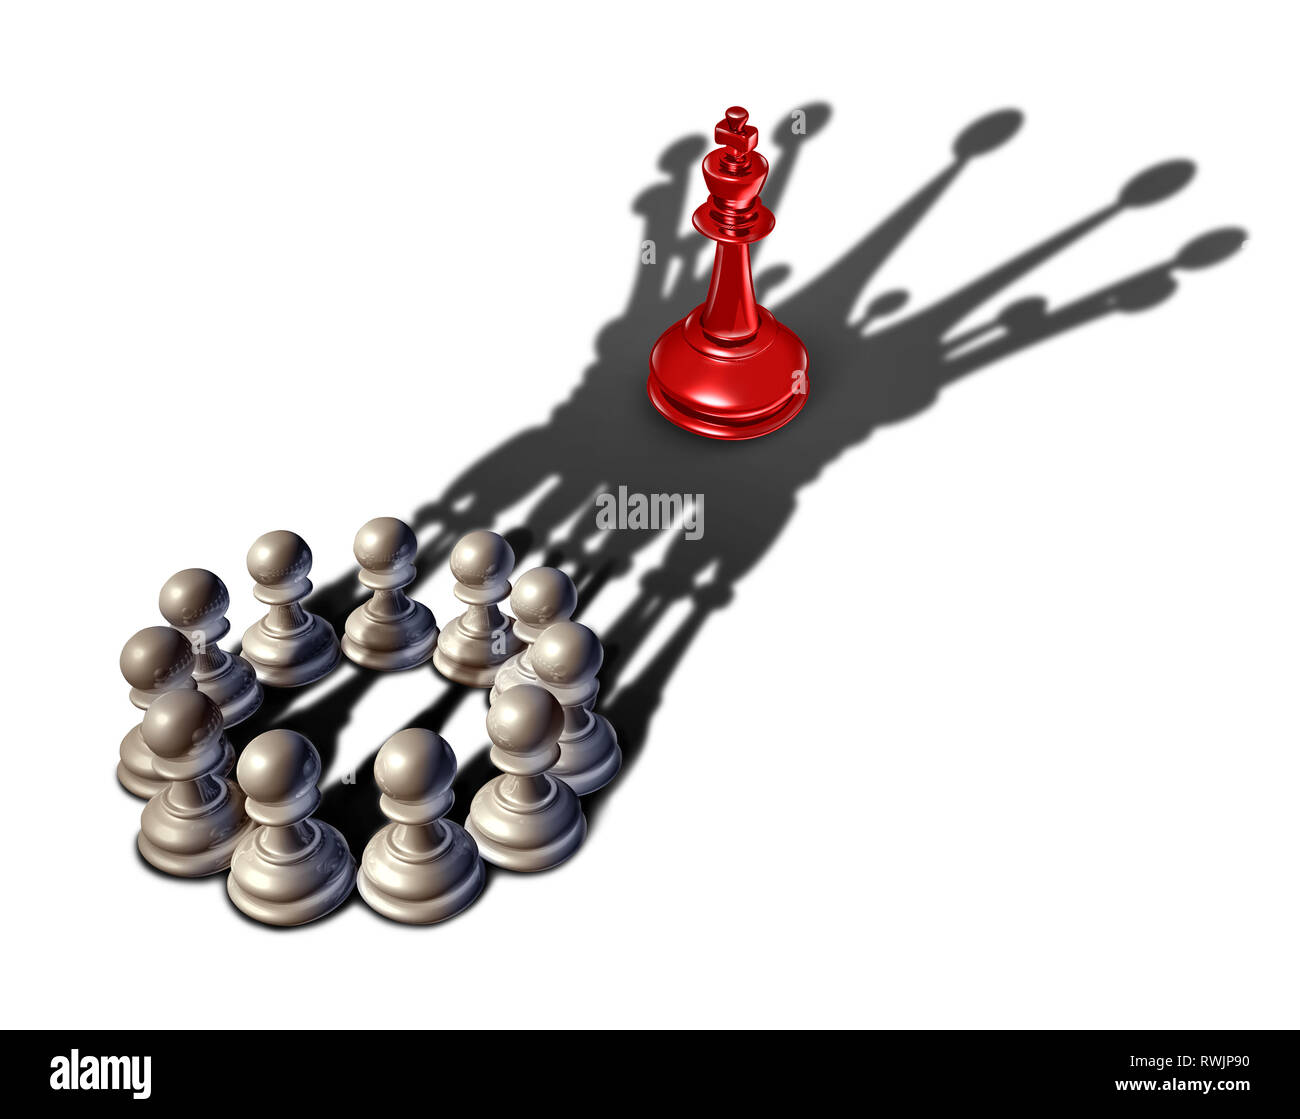 Business strategy leadership concept as a group of chess pawn pieces gathering together as a team to lead and form a king piece to win over another. Stock Photo